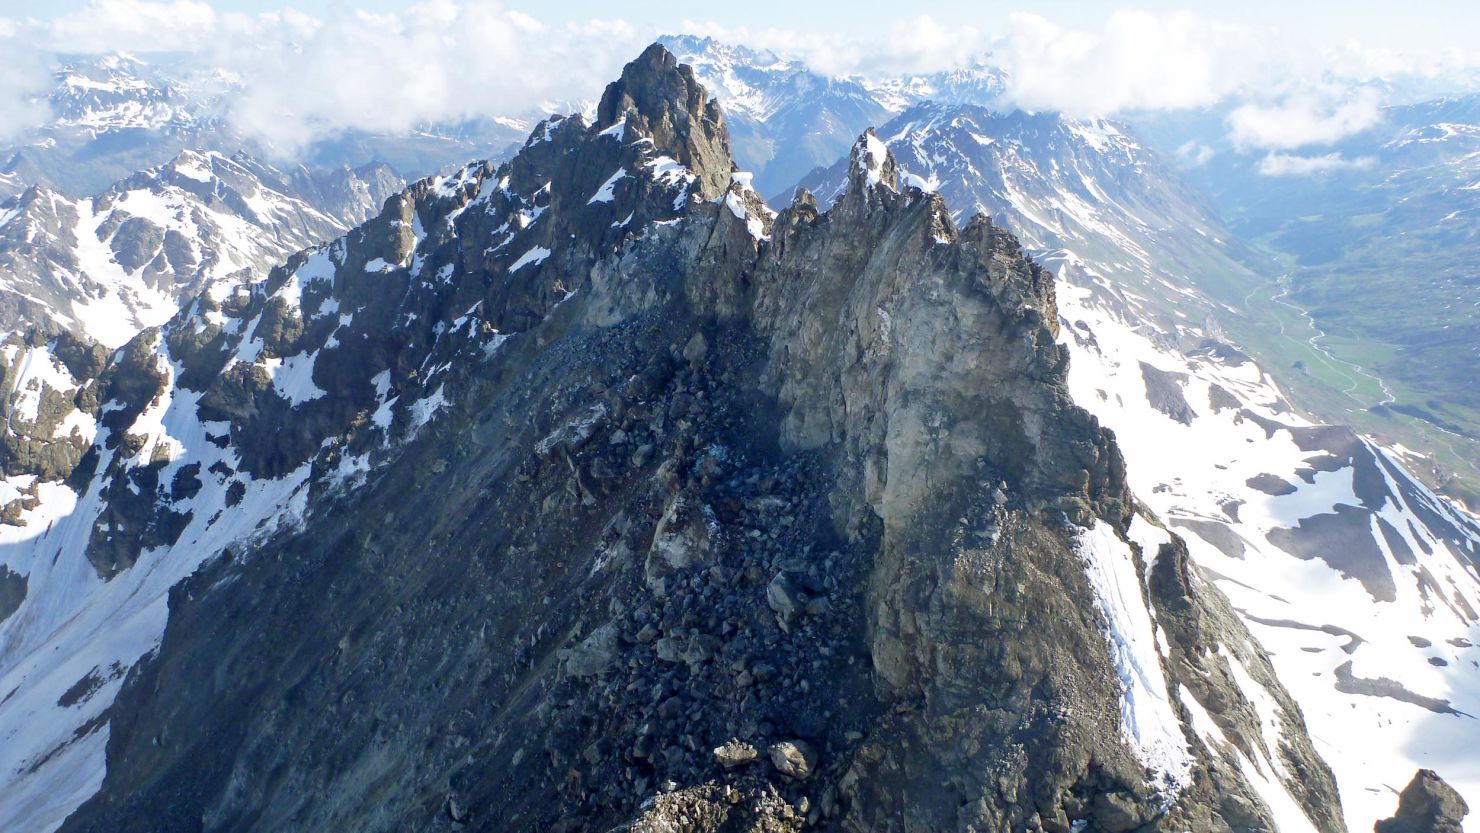 Fluchthorn Mountain, Austria, after the rockfall which took place on Sunday, June 11.